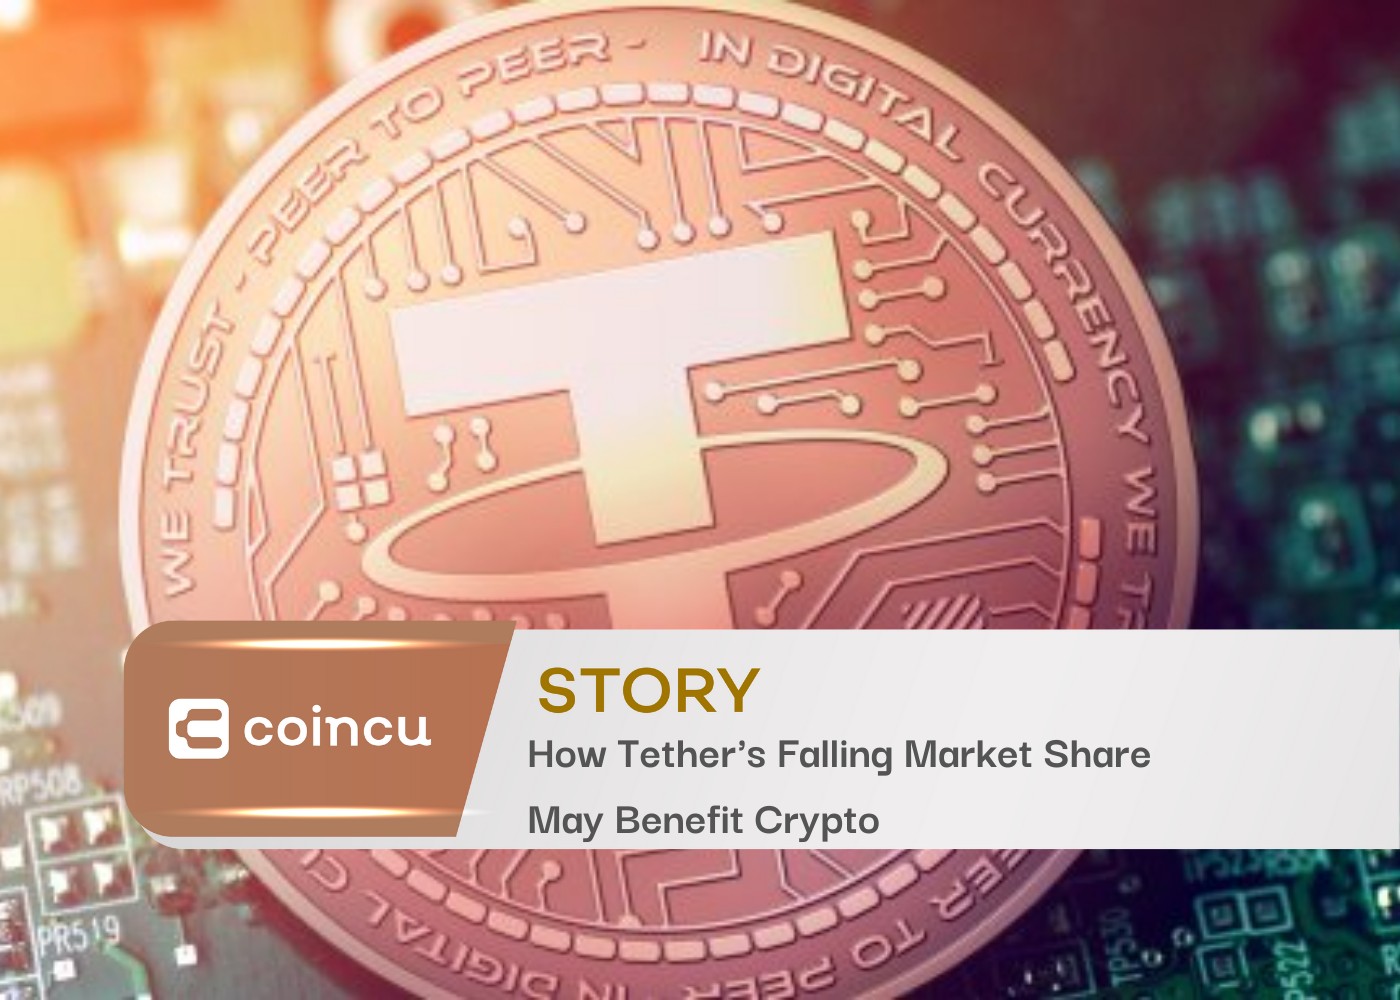 How Tether's Falling Market Share May Benefit Crypto